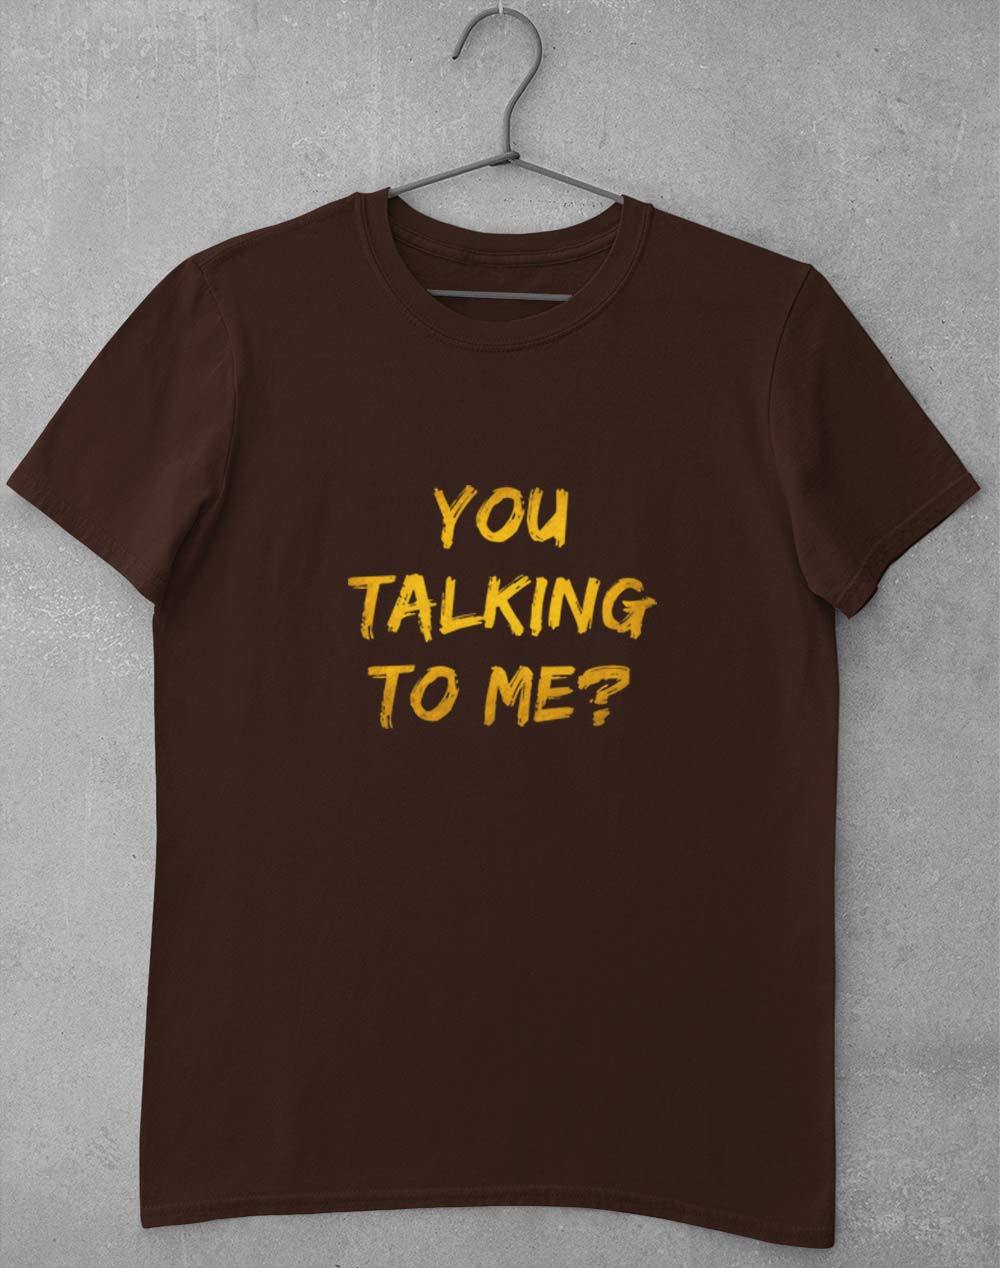 You Talking To Me? T-Shirt S / Dark Chocolate  - Off World Tees